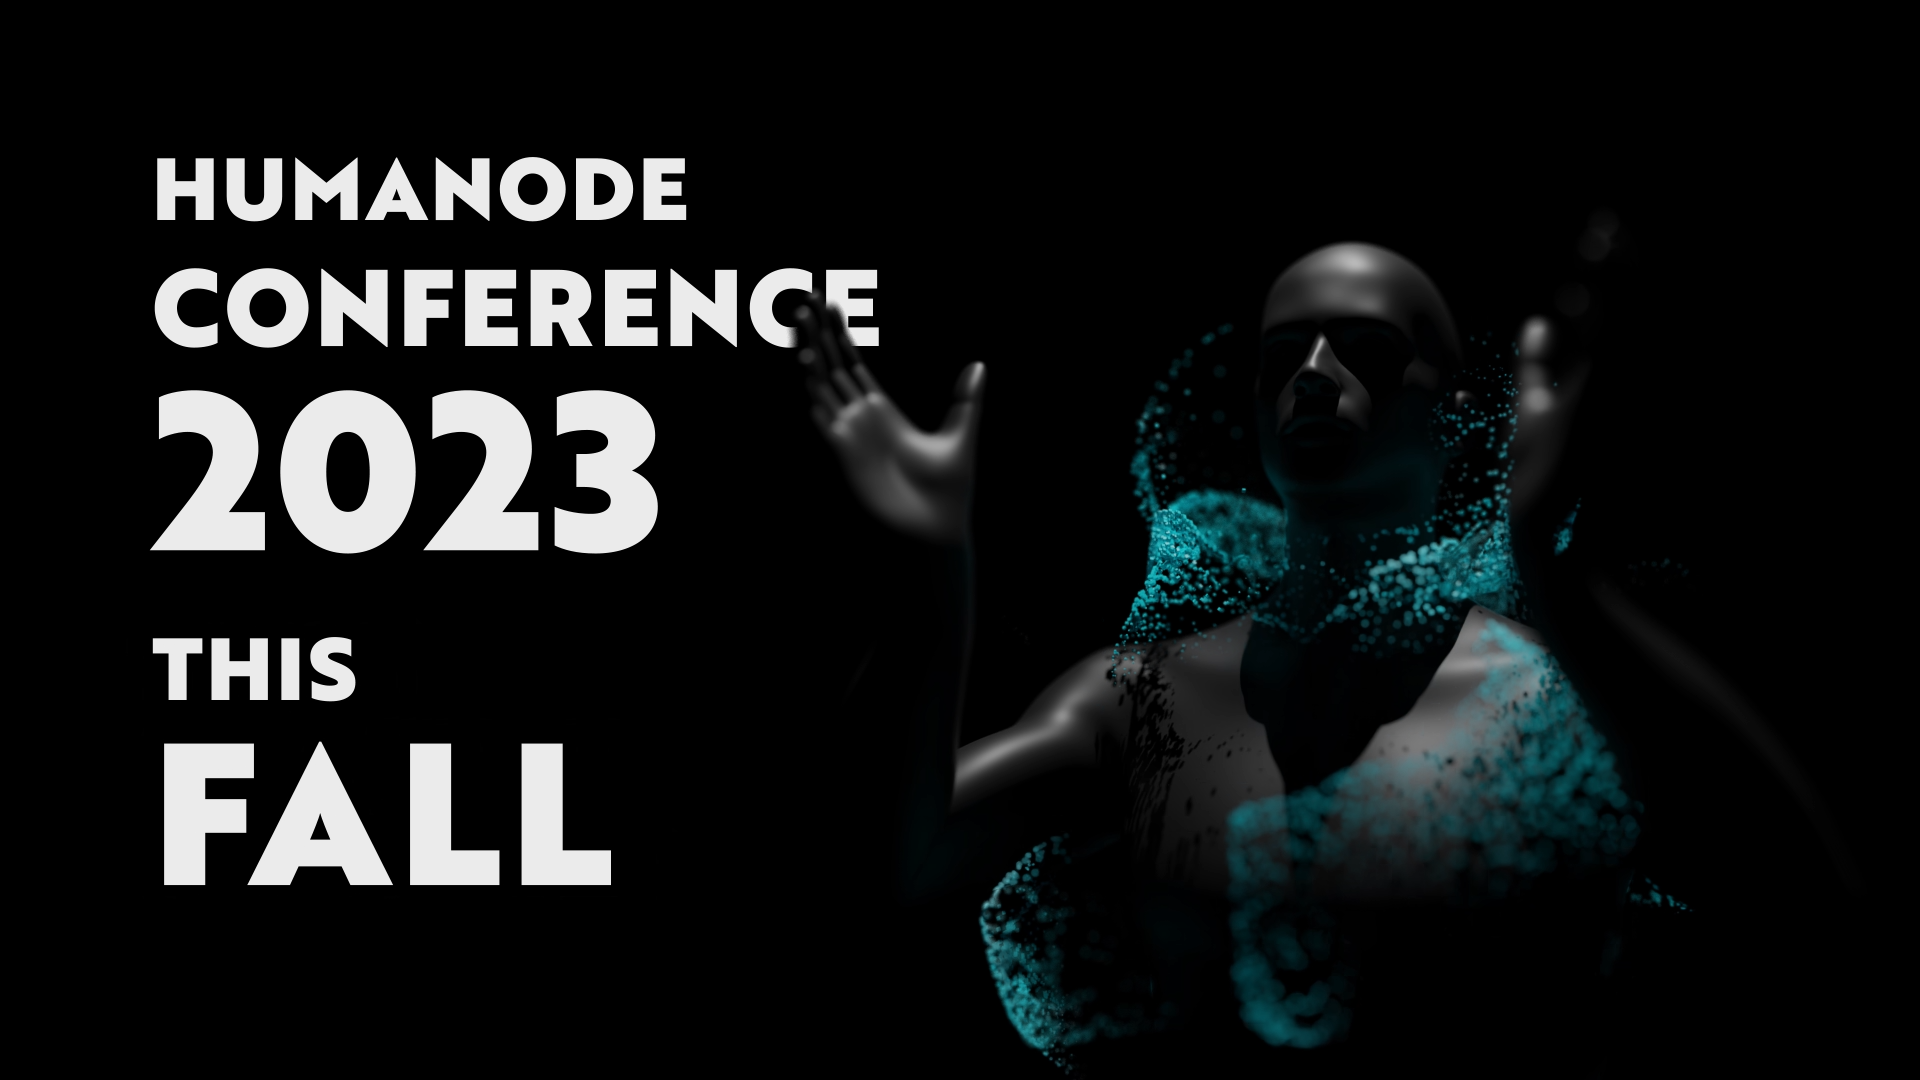 Humanode Conference 2023 Announcement